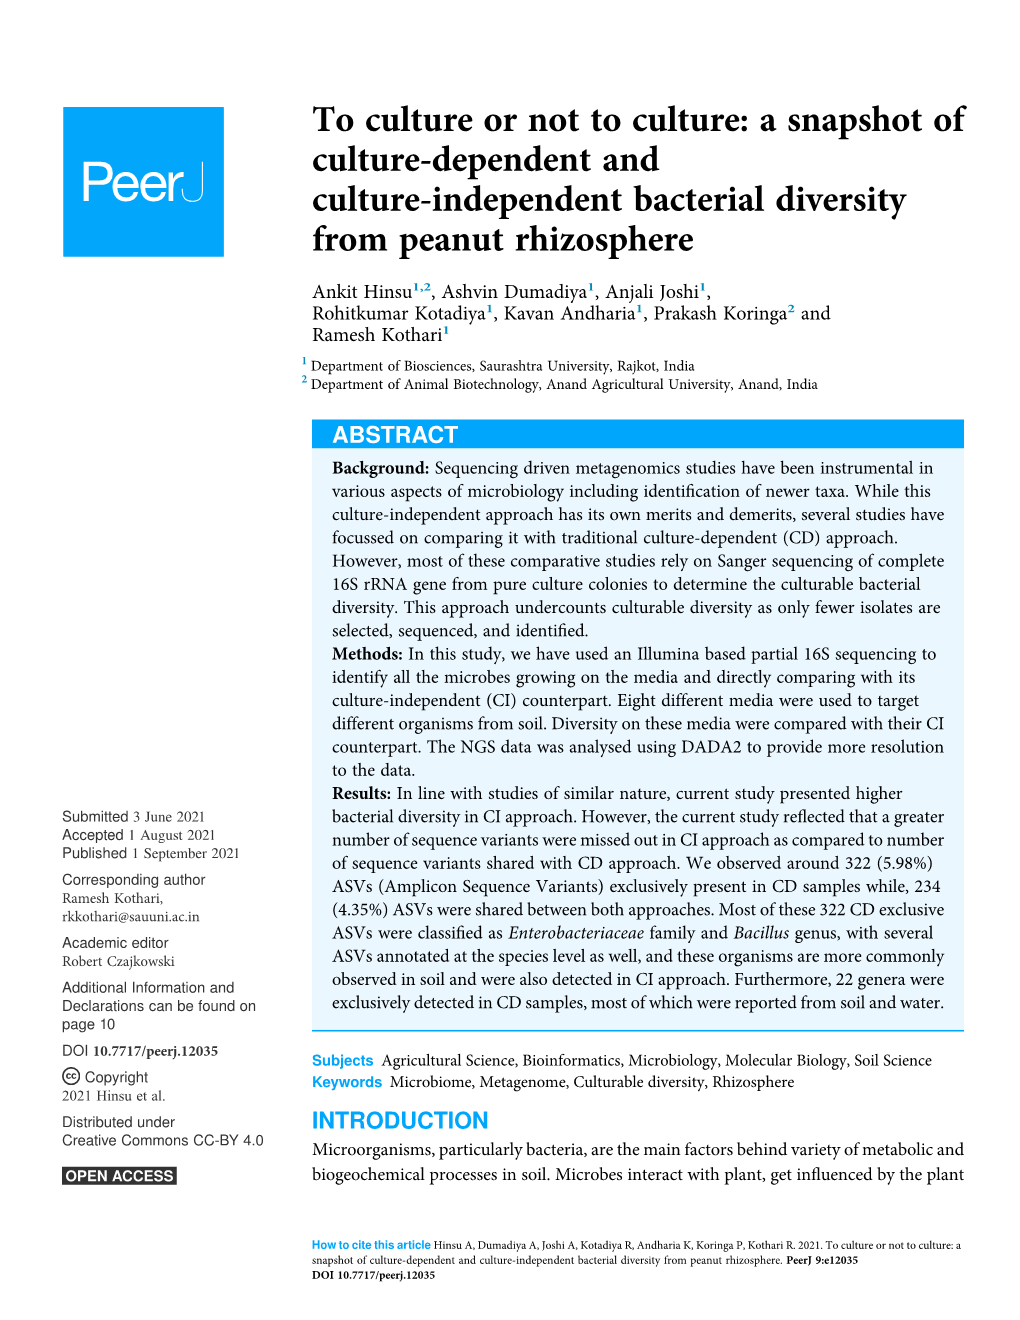 A Snapshot of Culture-Dependent and Culture-Independent Bacterial Diversity from Peanut Rhizosphere